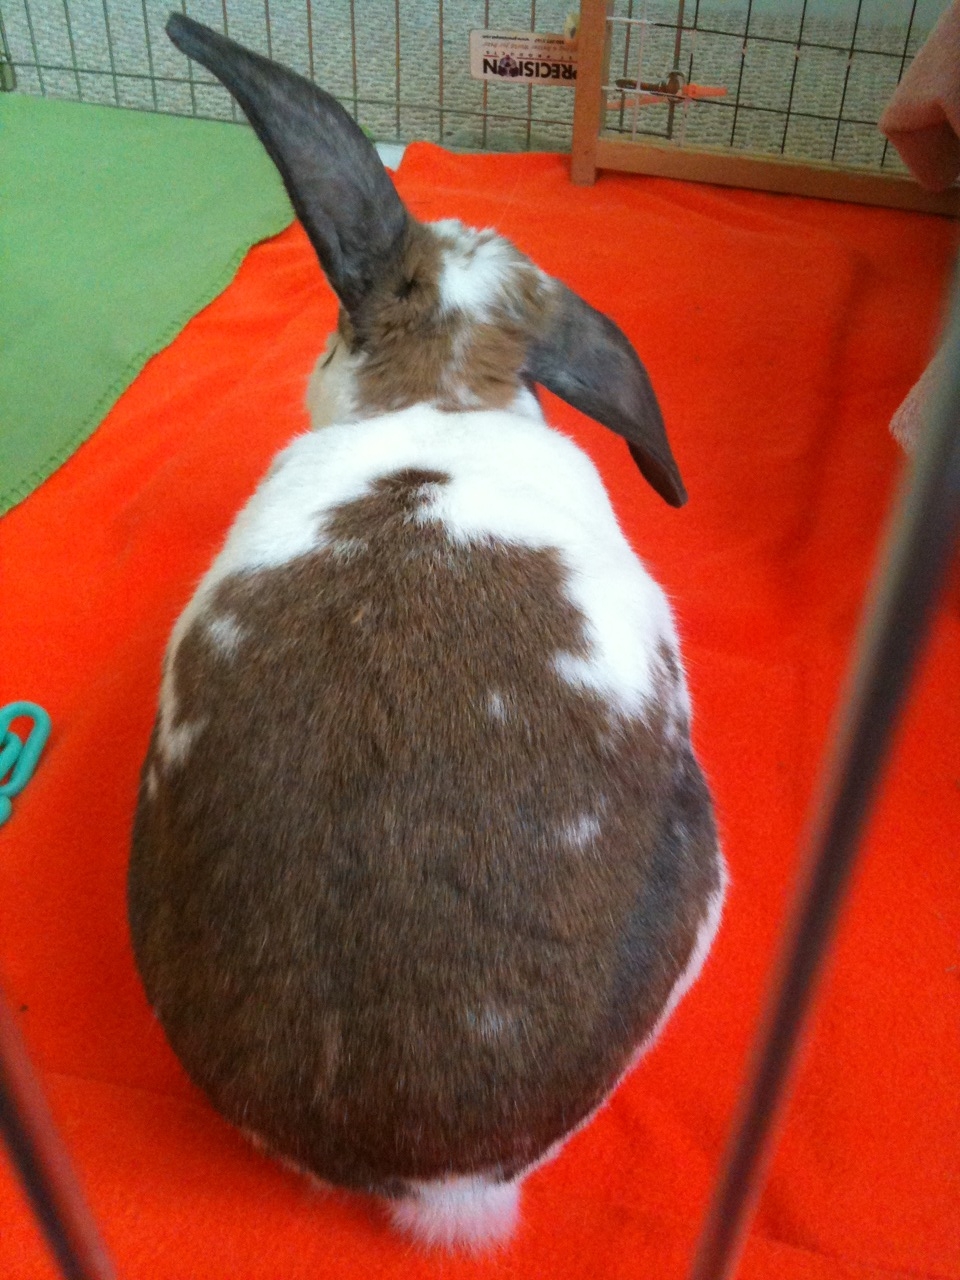 Sulky Bunny Keeps an Ear Up to Hear If You Come with a Peace Offering Treat